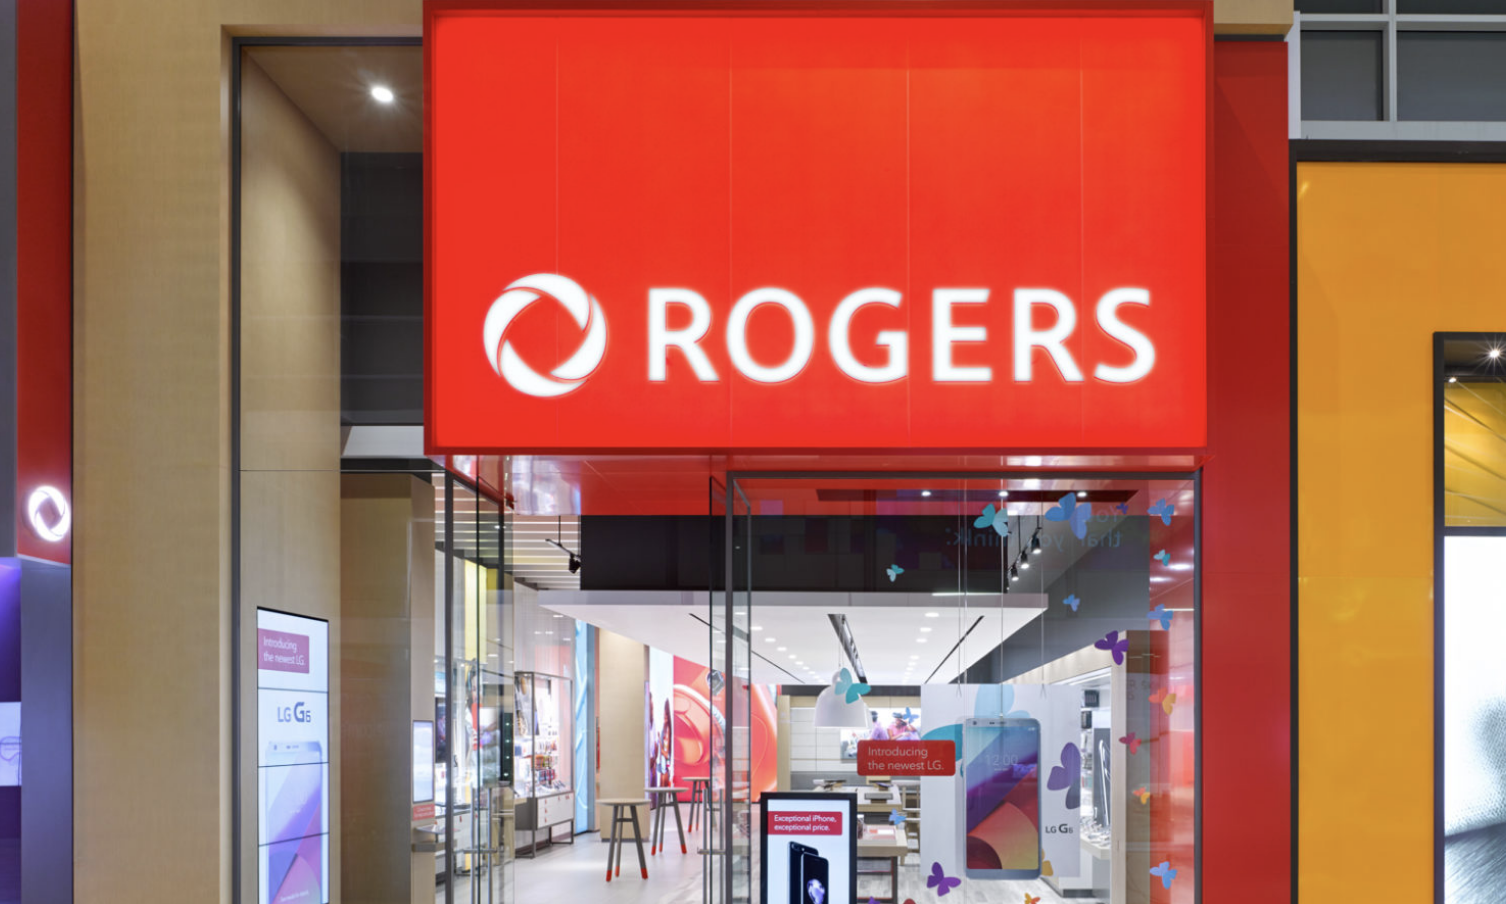 Canada’s industry minister and Rogers CEO to meet after massive outage